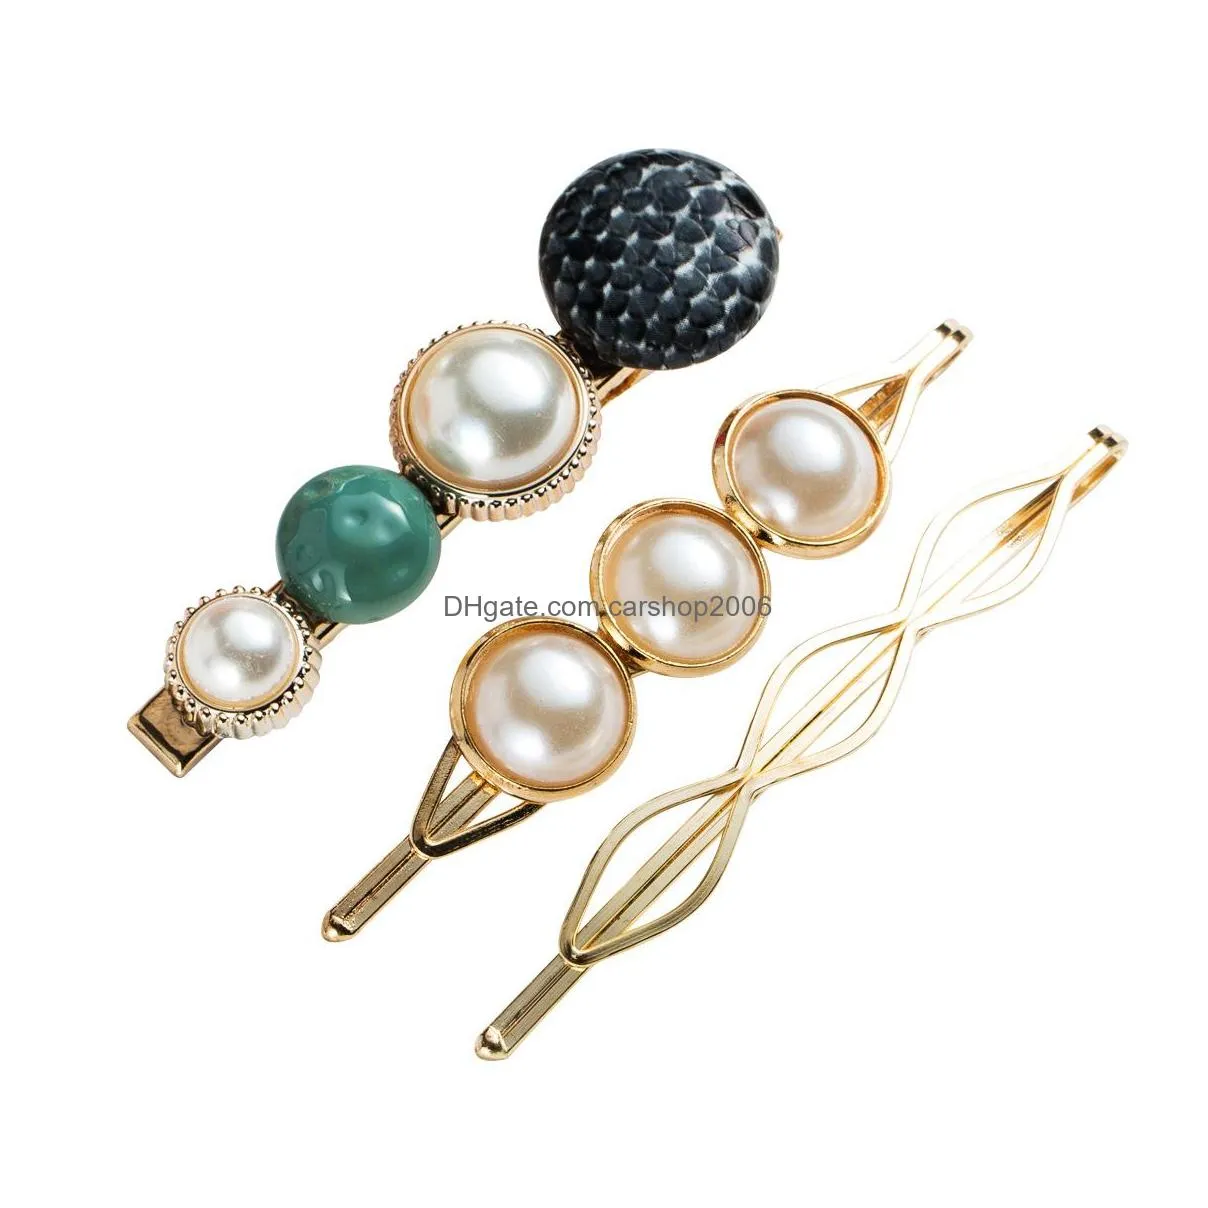 fashion jewelry womens faux pearl beads hairpin hair clip bobby pin barrettes 3pcs set hair accessory